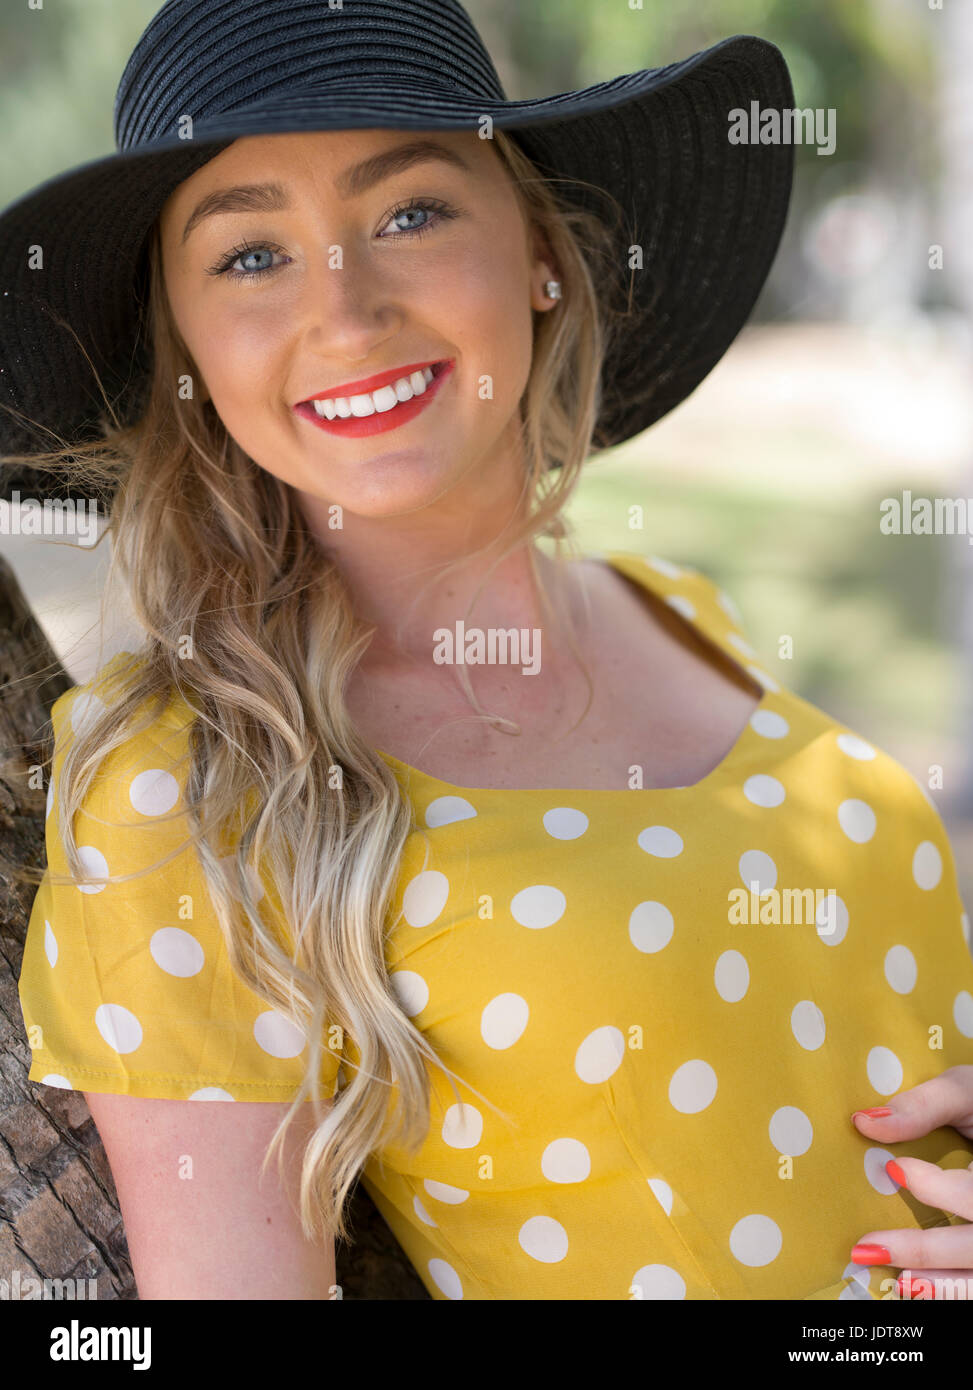 Young Blonde Australian Girl In High Resolution Stock Photography Images - Alamy